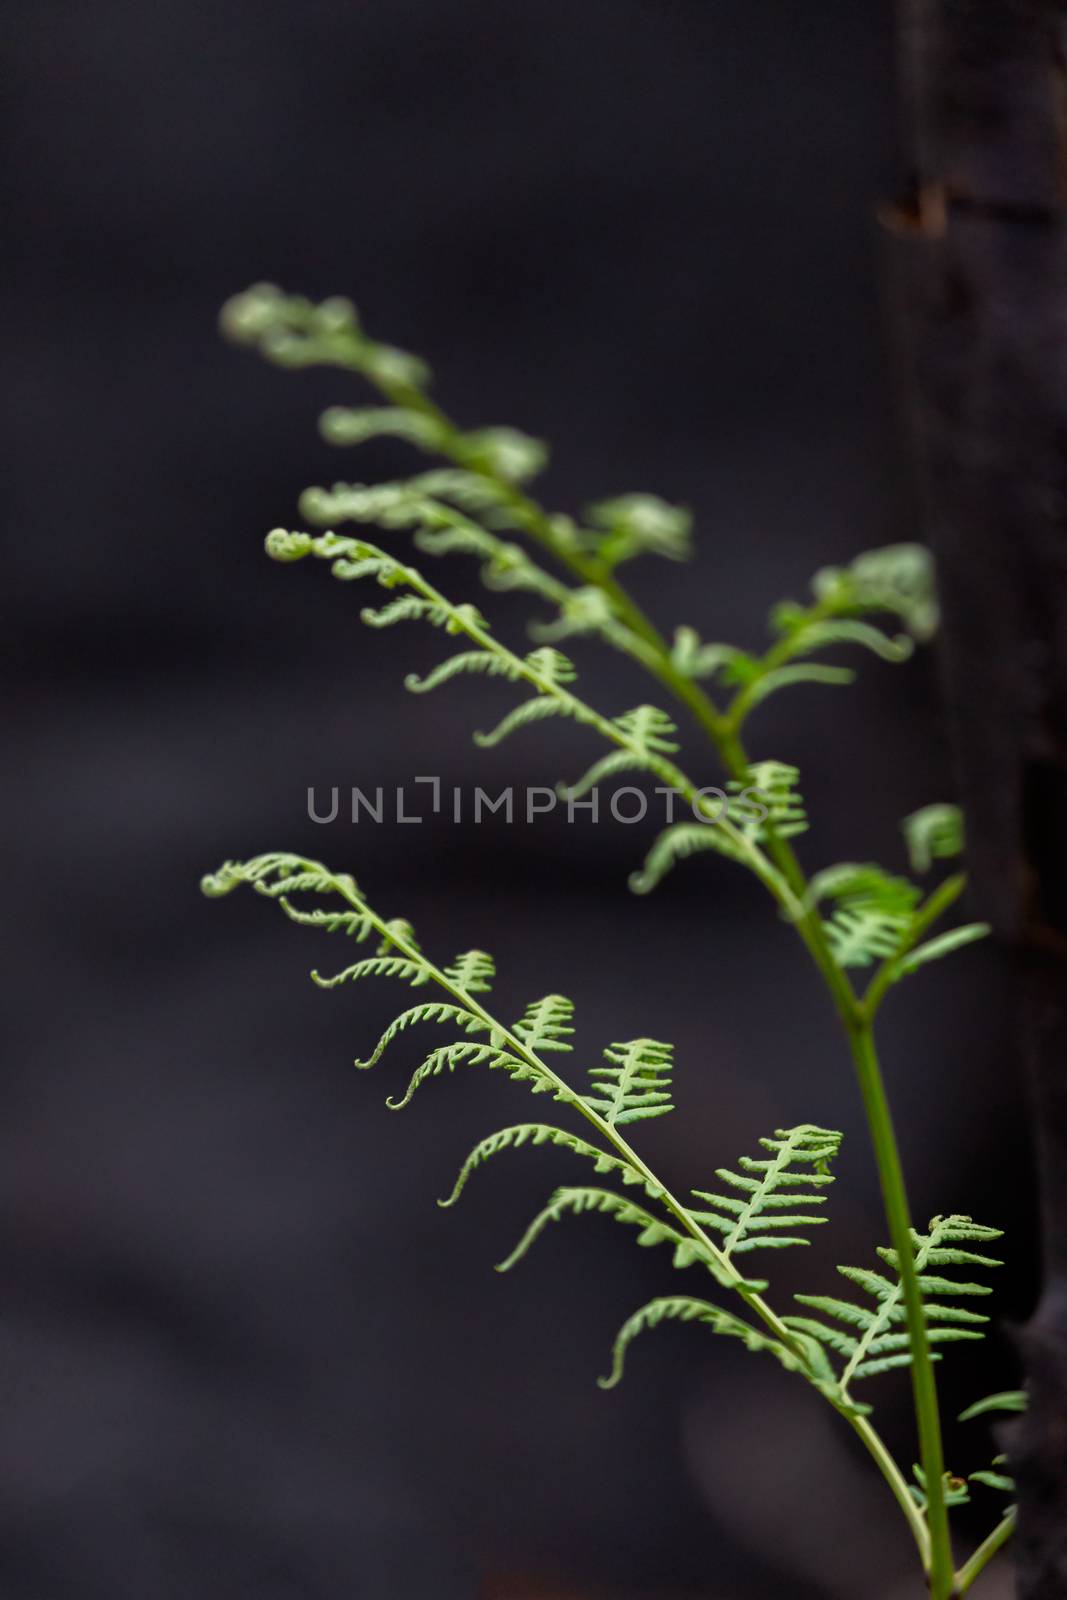 A young fern springs up after bush fire by lovleah